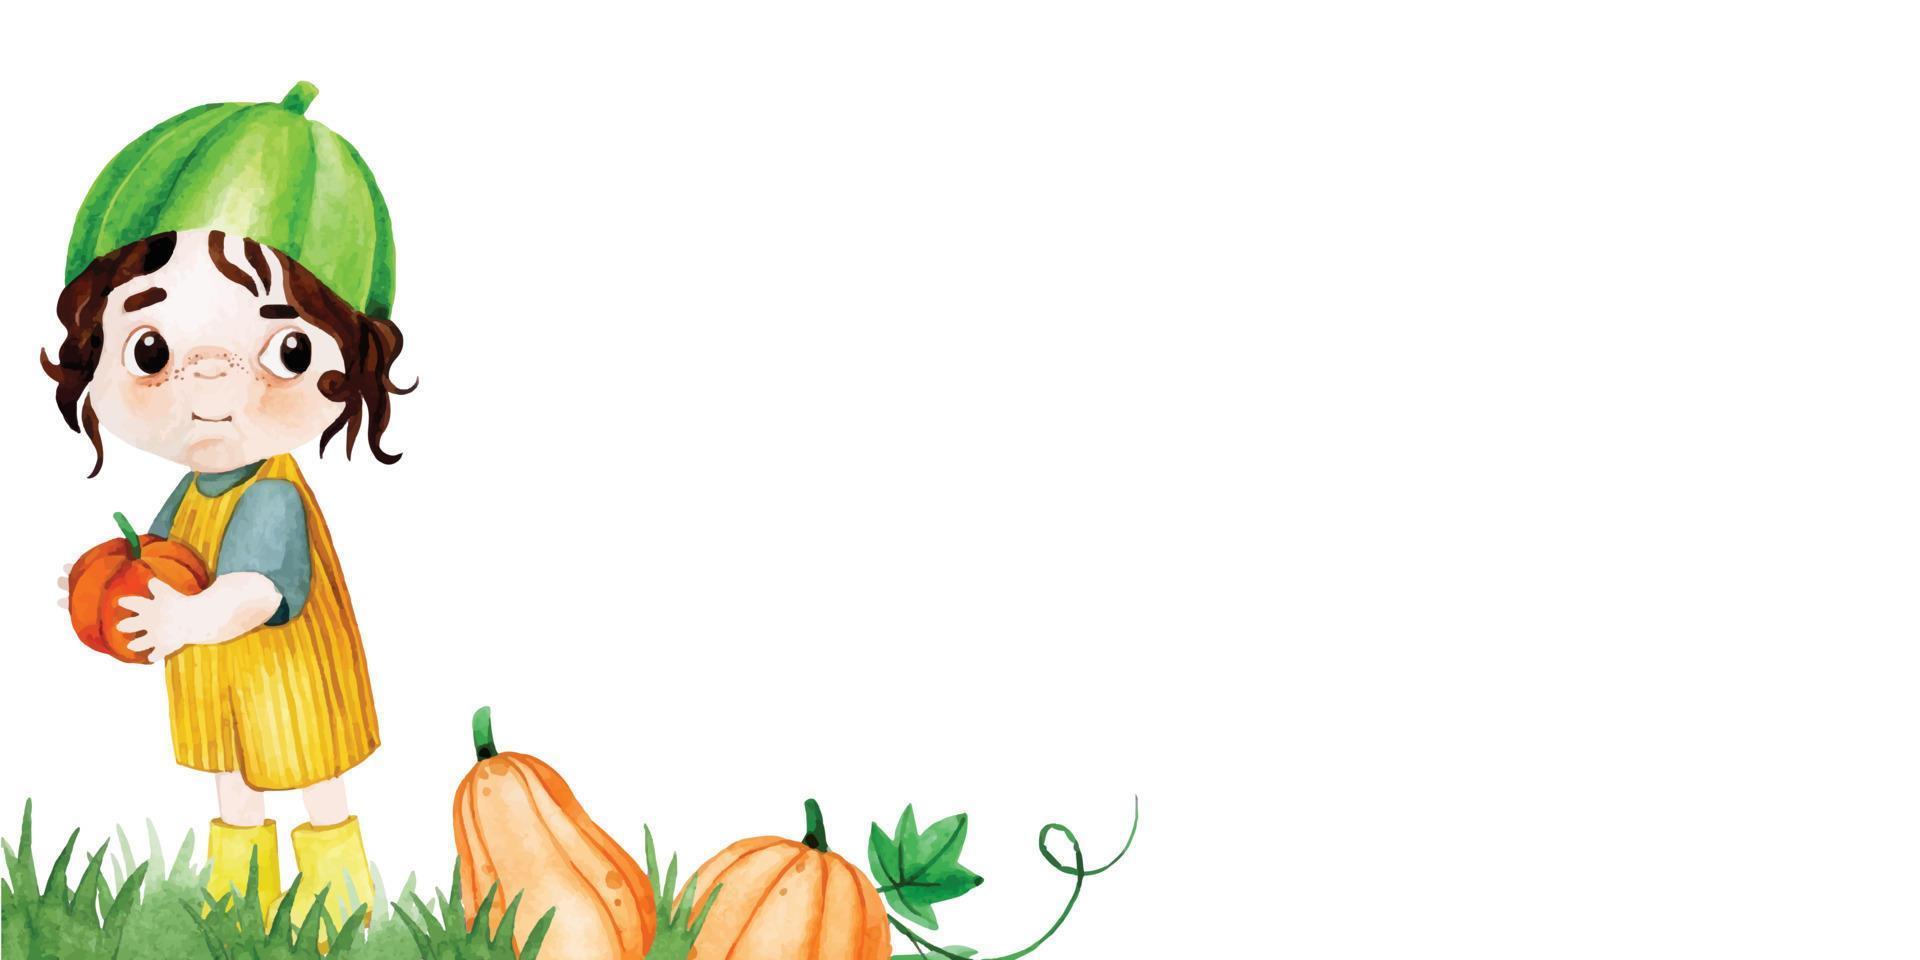 watercolor drawing, banner, frame on the theme of autumn, thanksgiving day. cute baby in a pumpkin costume, green grass and pumpkins. halloween vector